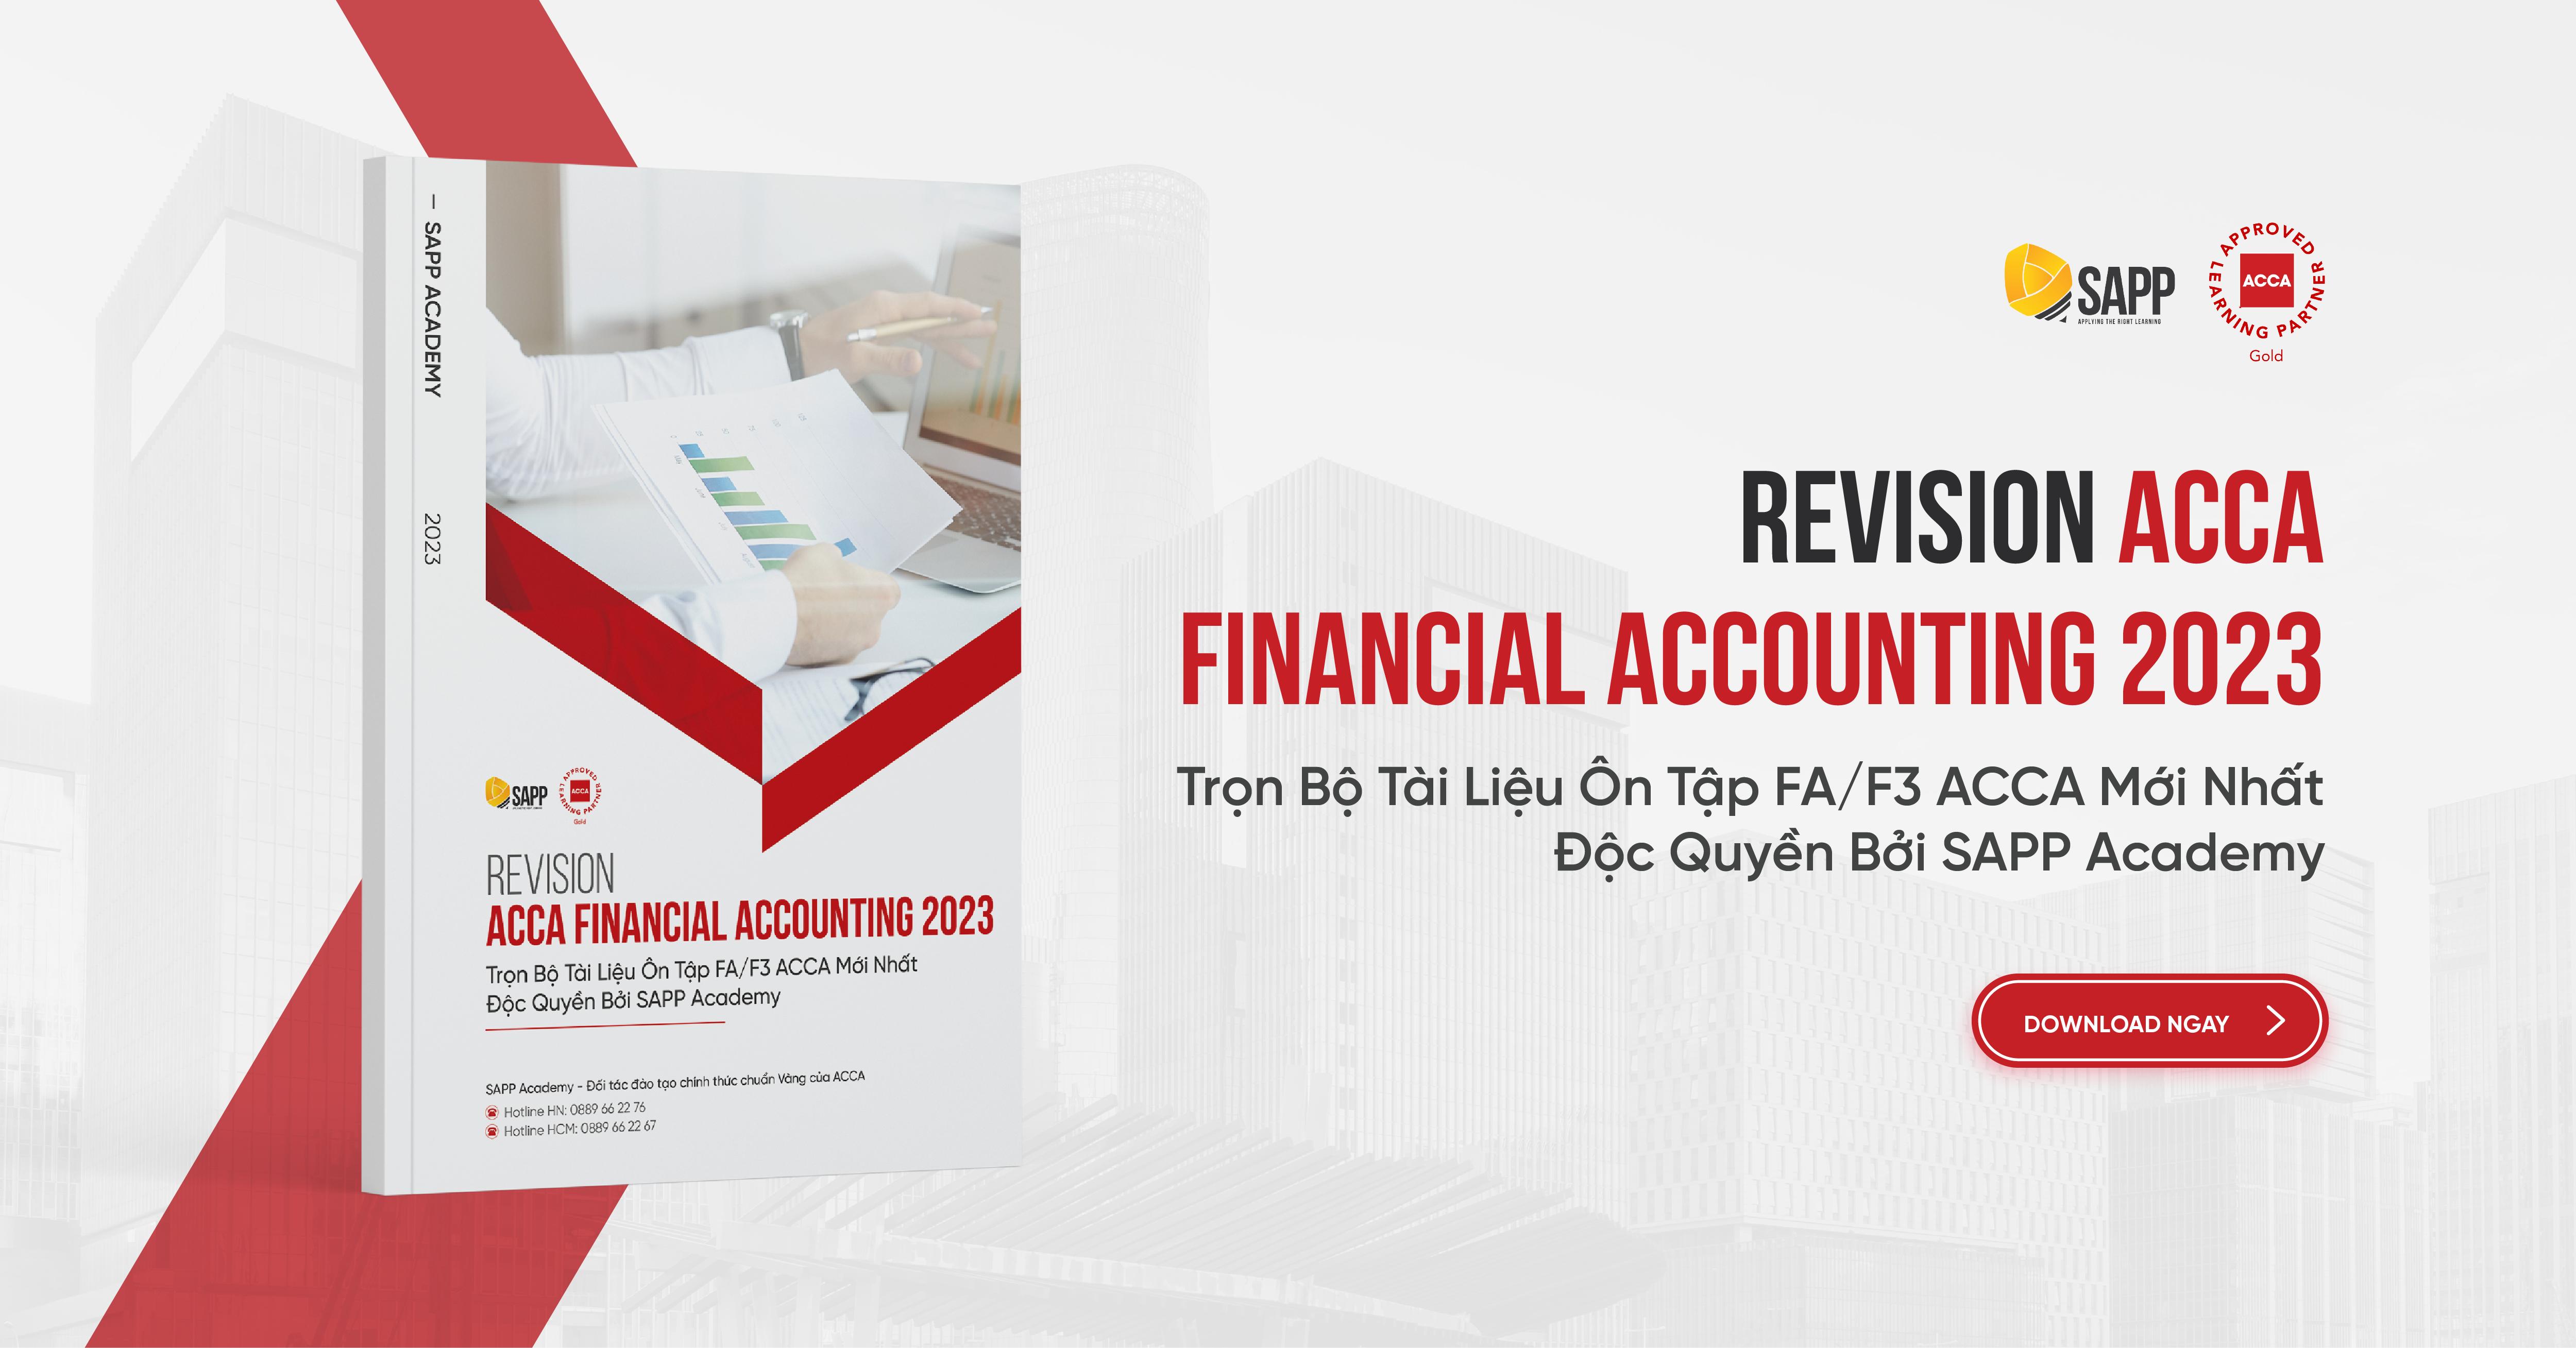 Revision ACCA Financial Accounting 2023